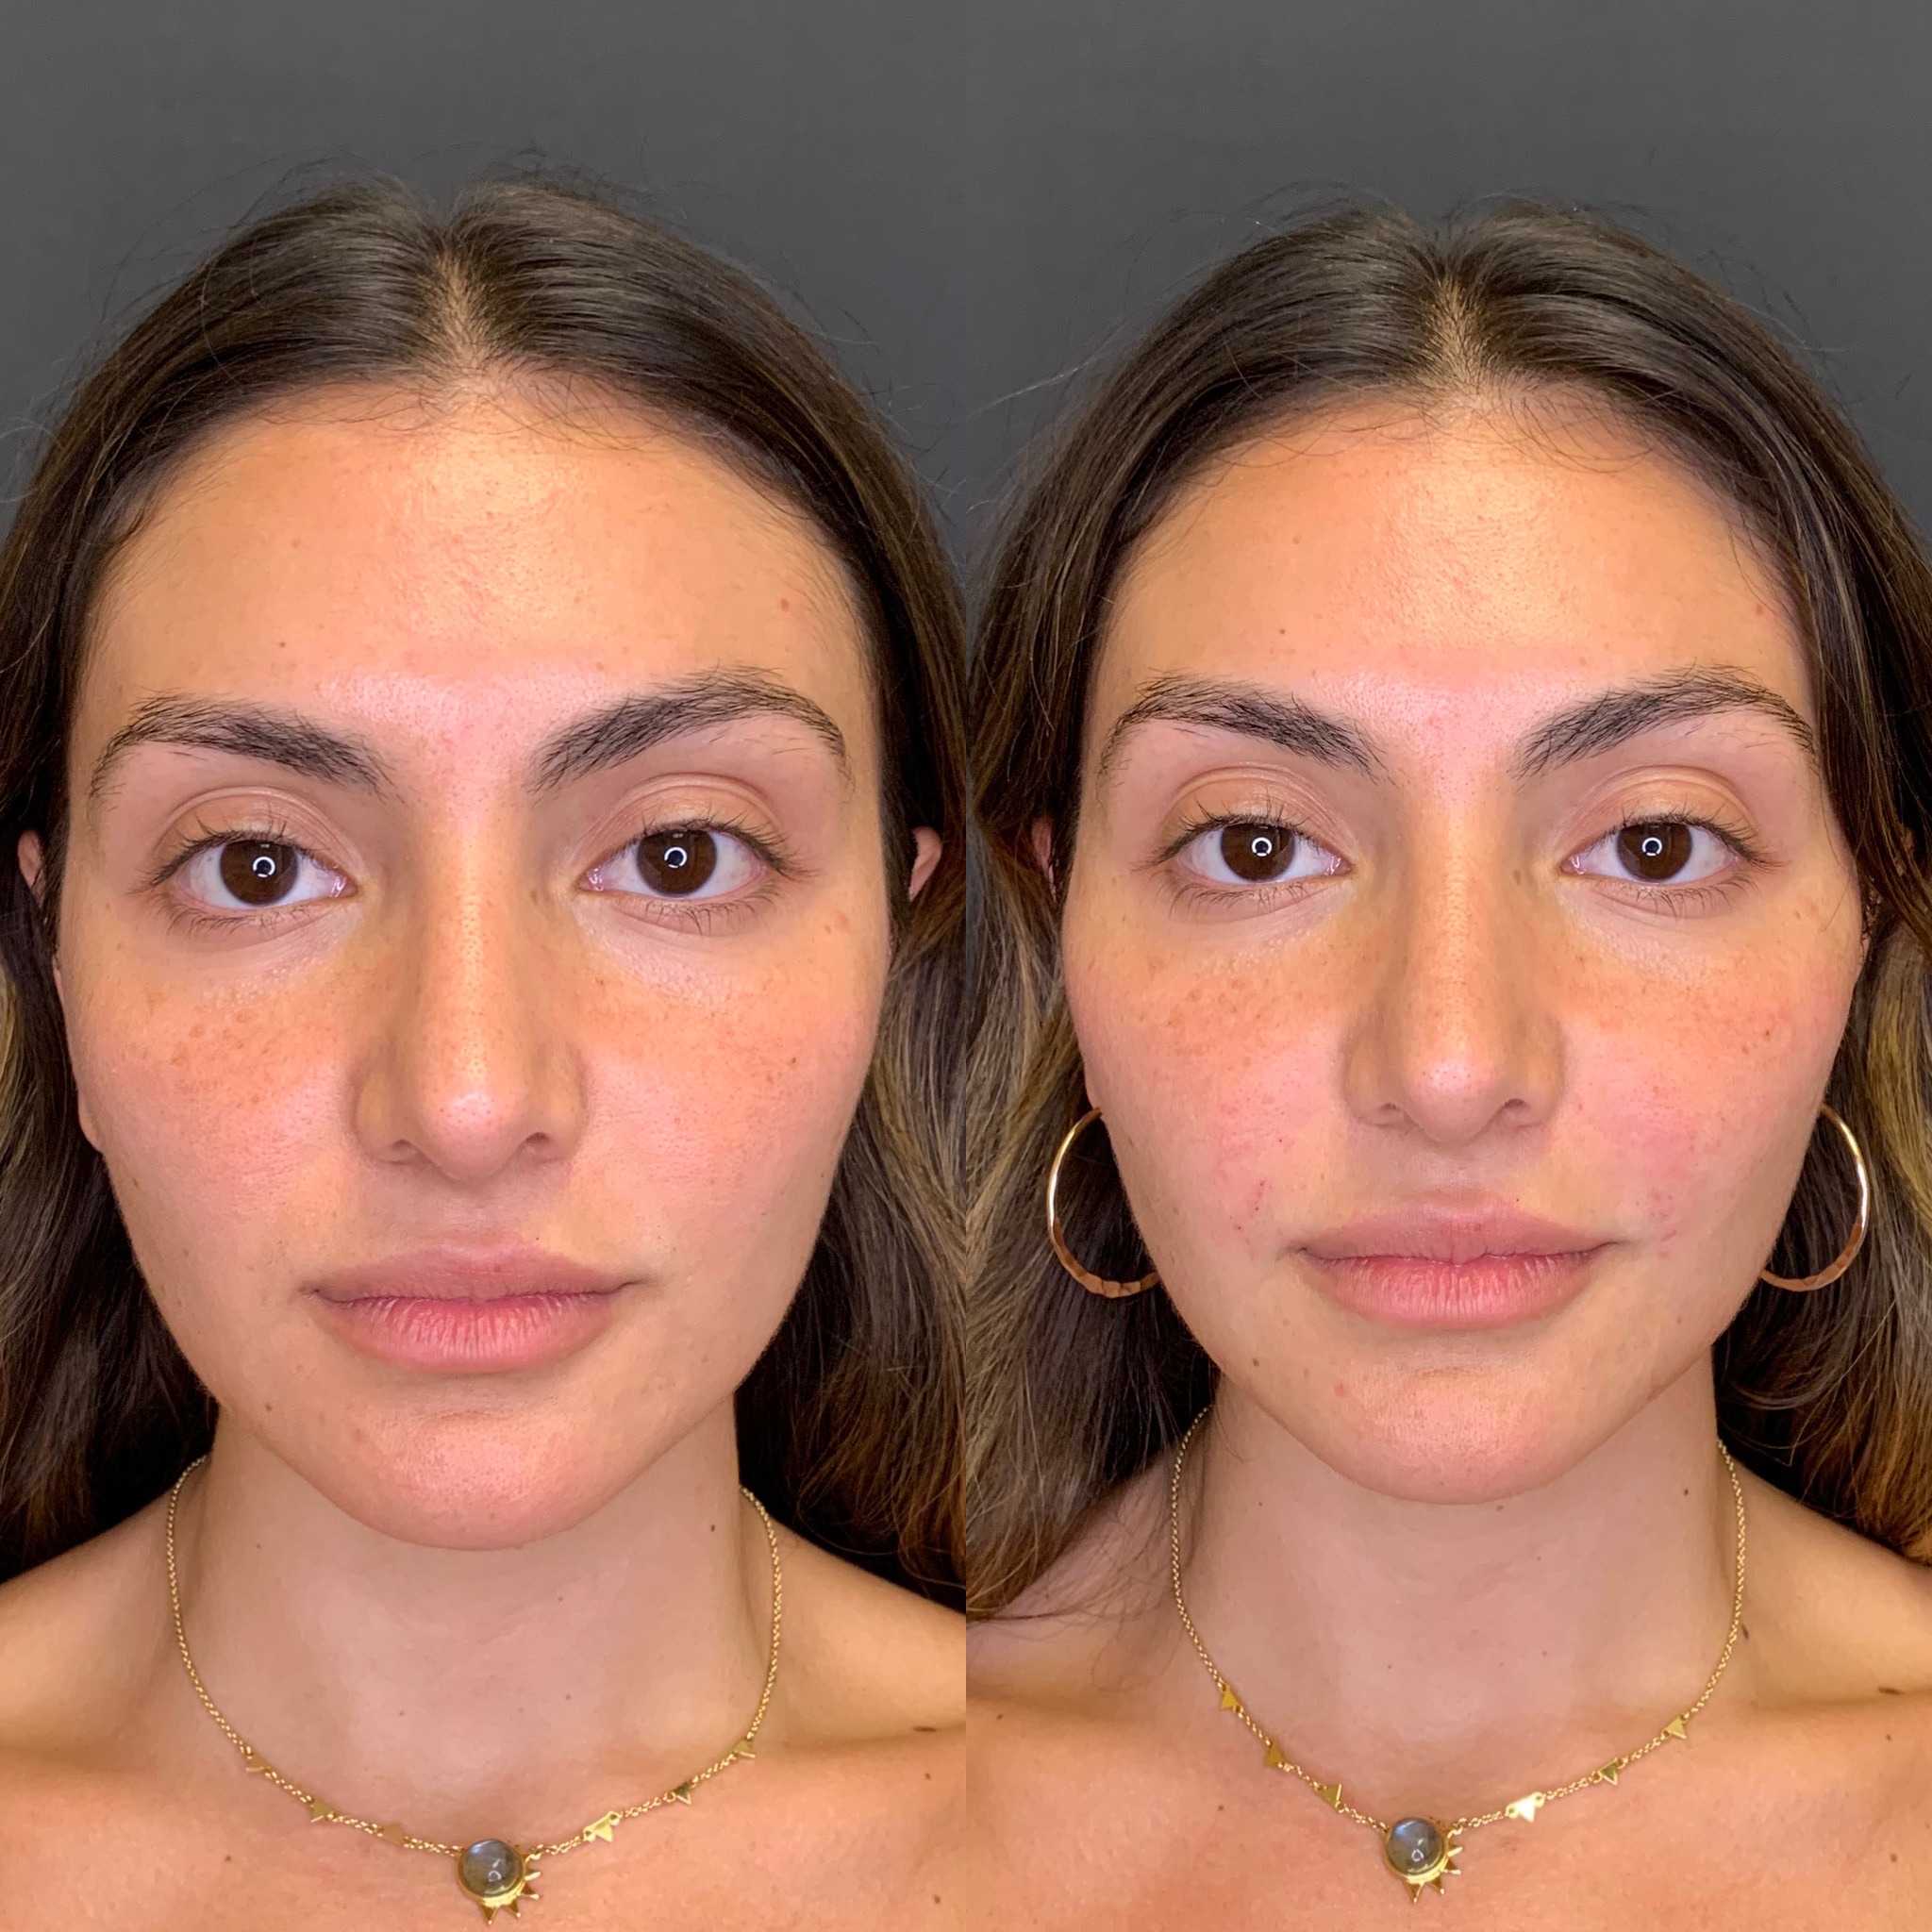 Before and After Cheeks | Beauty Boost Med Spa in Newport Beach, CA